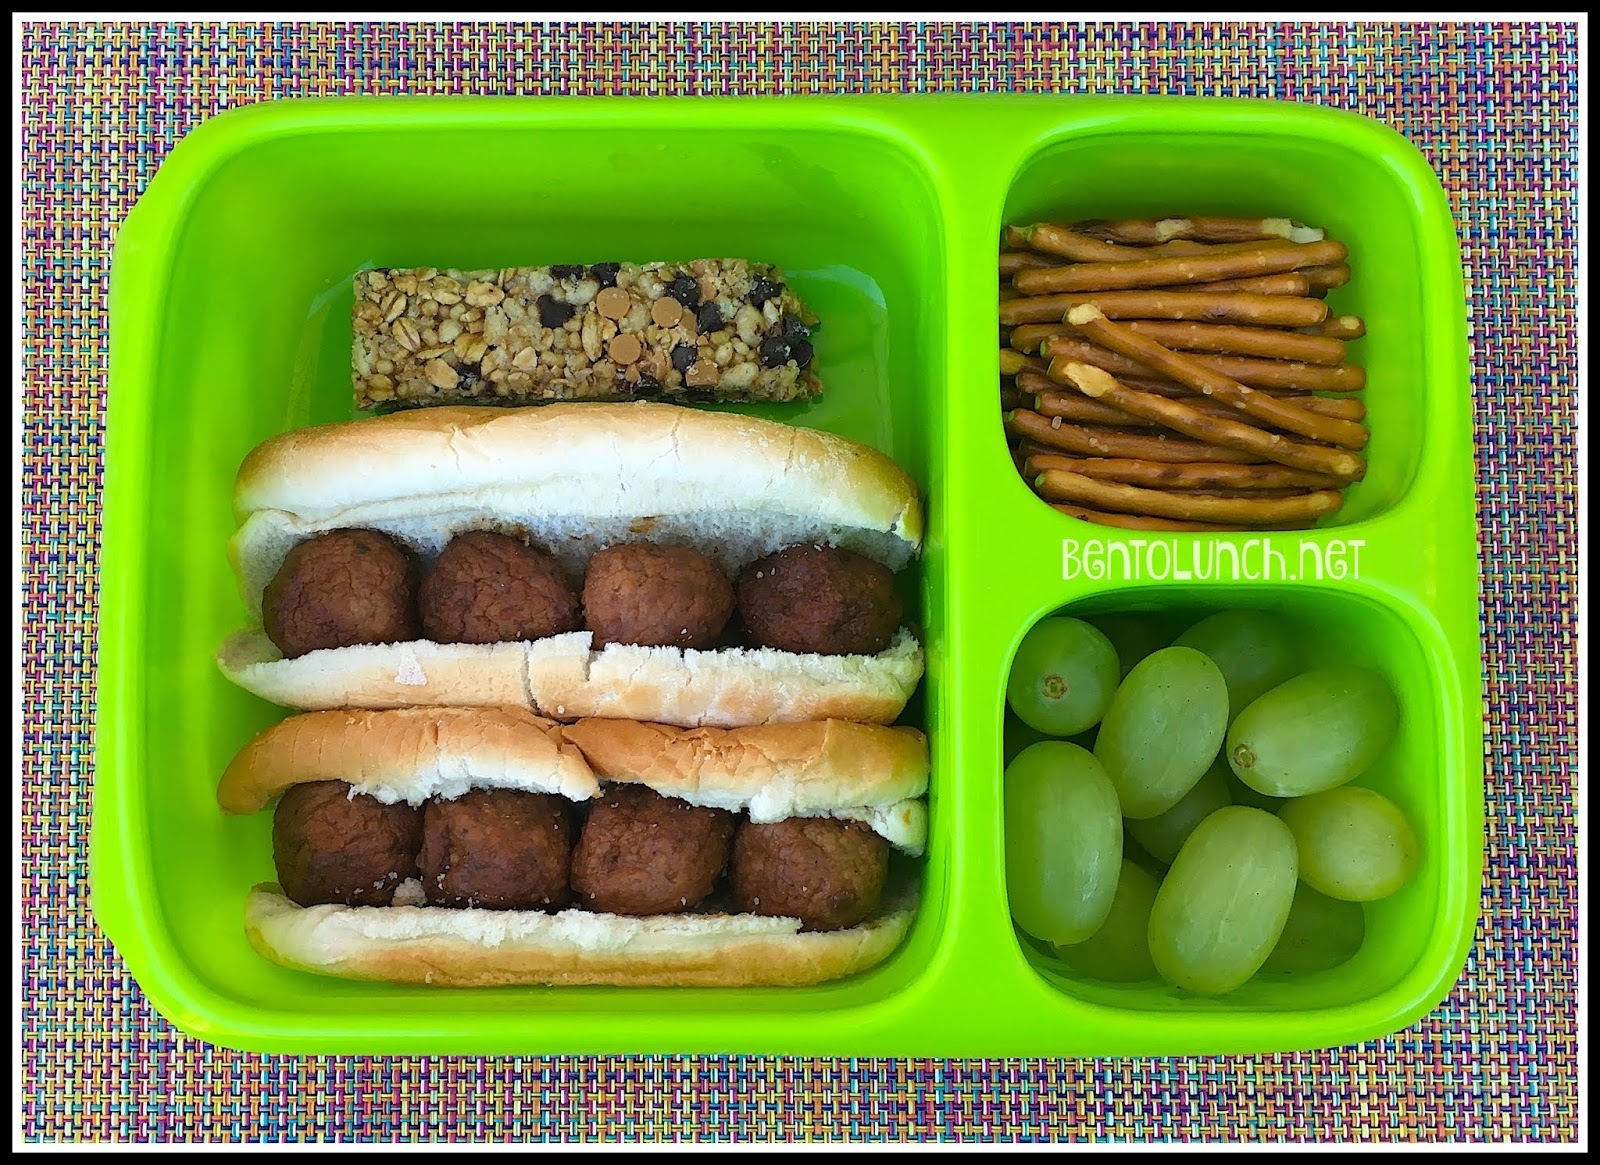 School Lunch For My Kids: Meatballs & Rice - White Blank Space